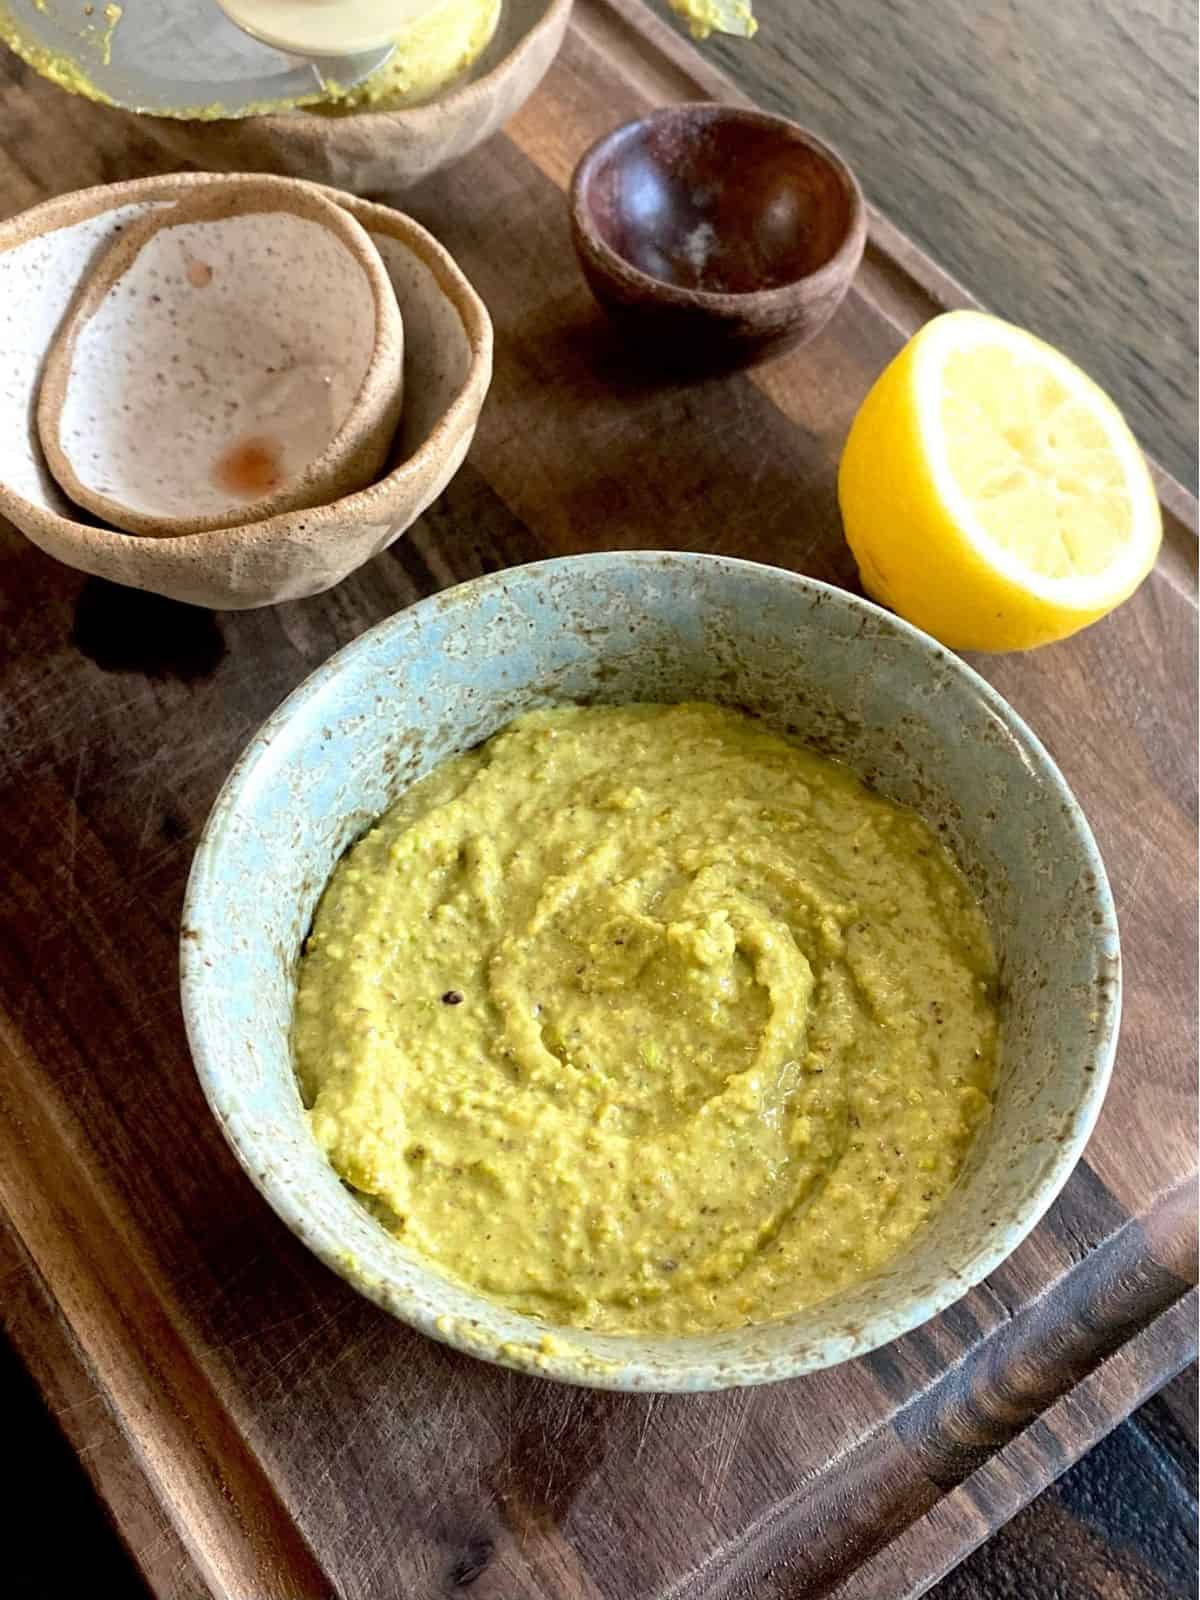 bowl of pistachio butter on wood board in front of empty bowls and squeezed lemon half